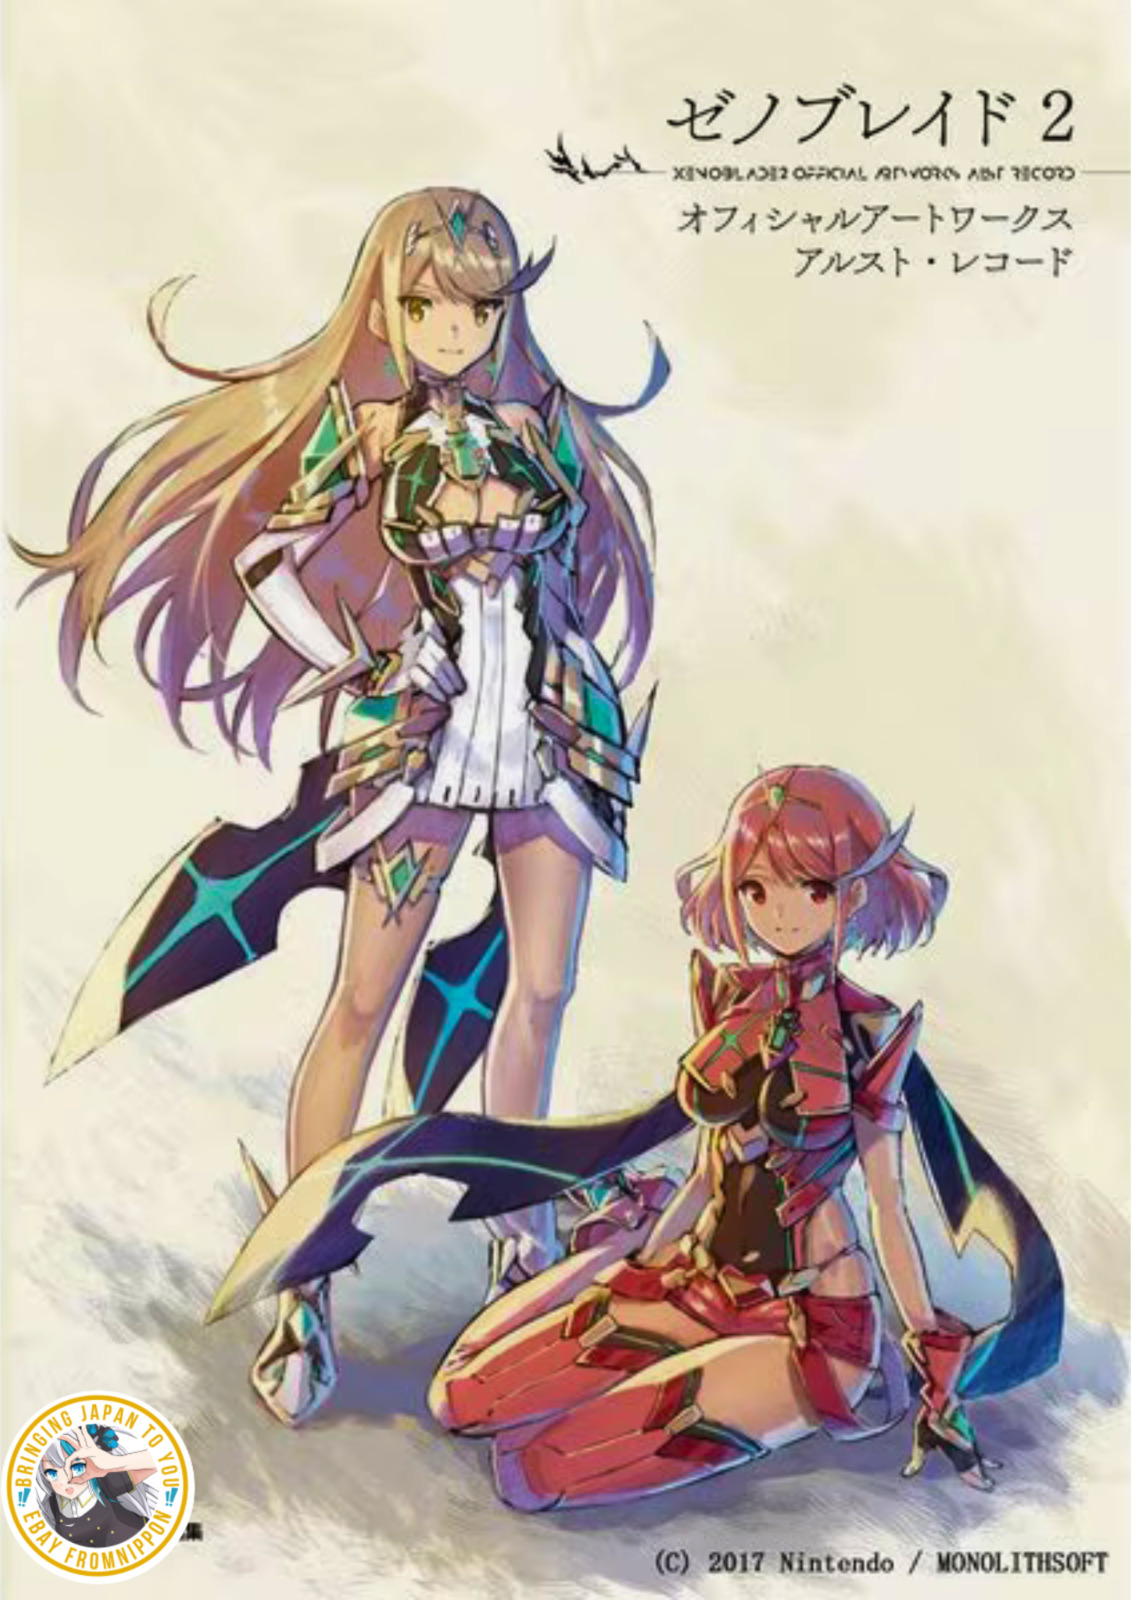 Xenoblade 2 Official Art Works ALST RECORD Japanese Illustrations Book New